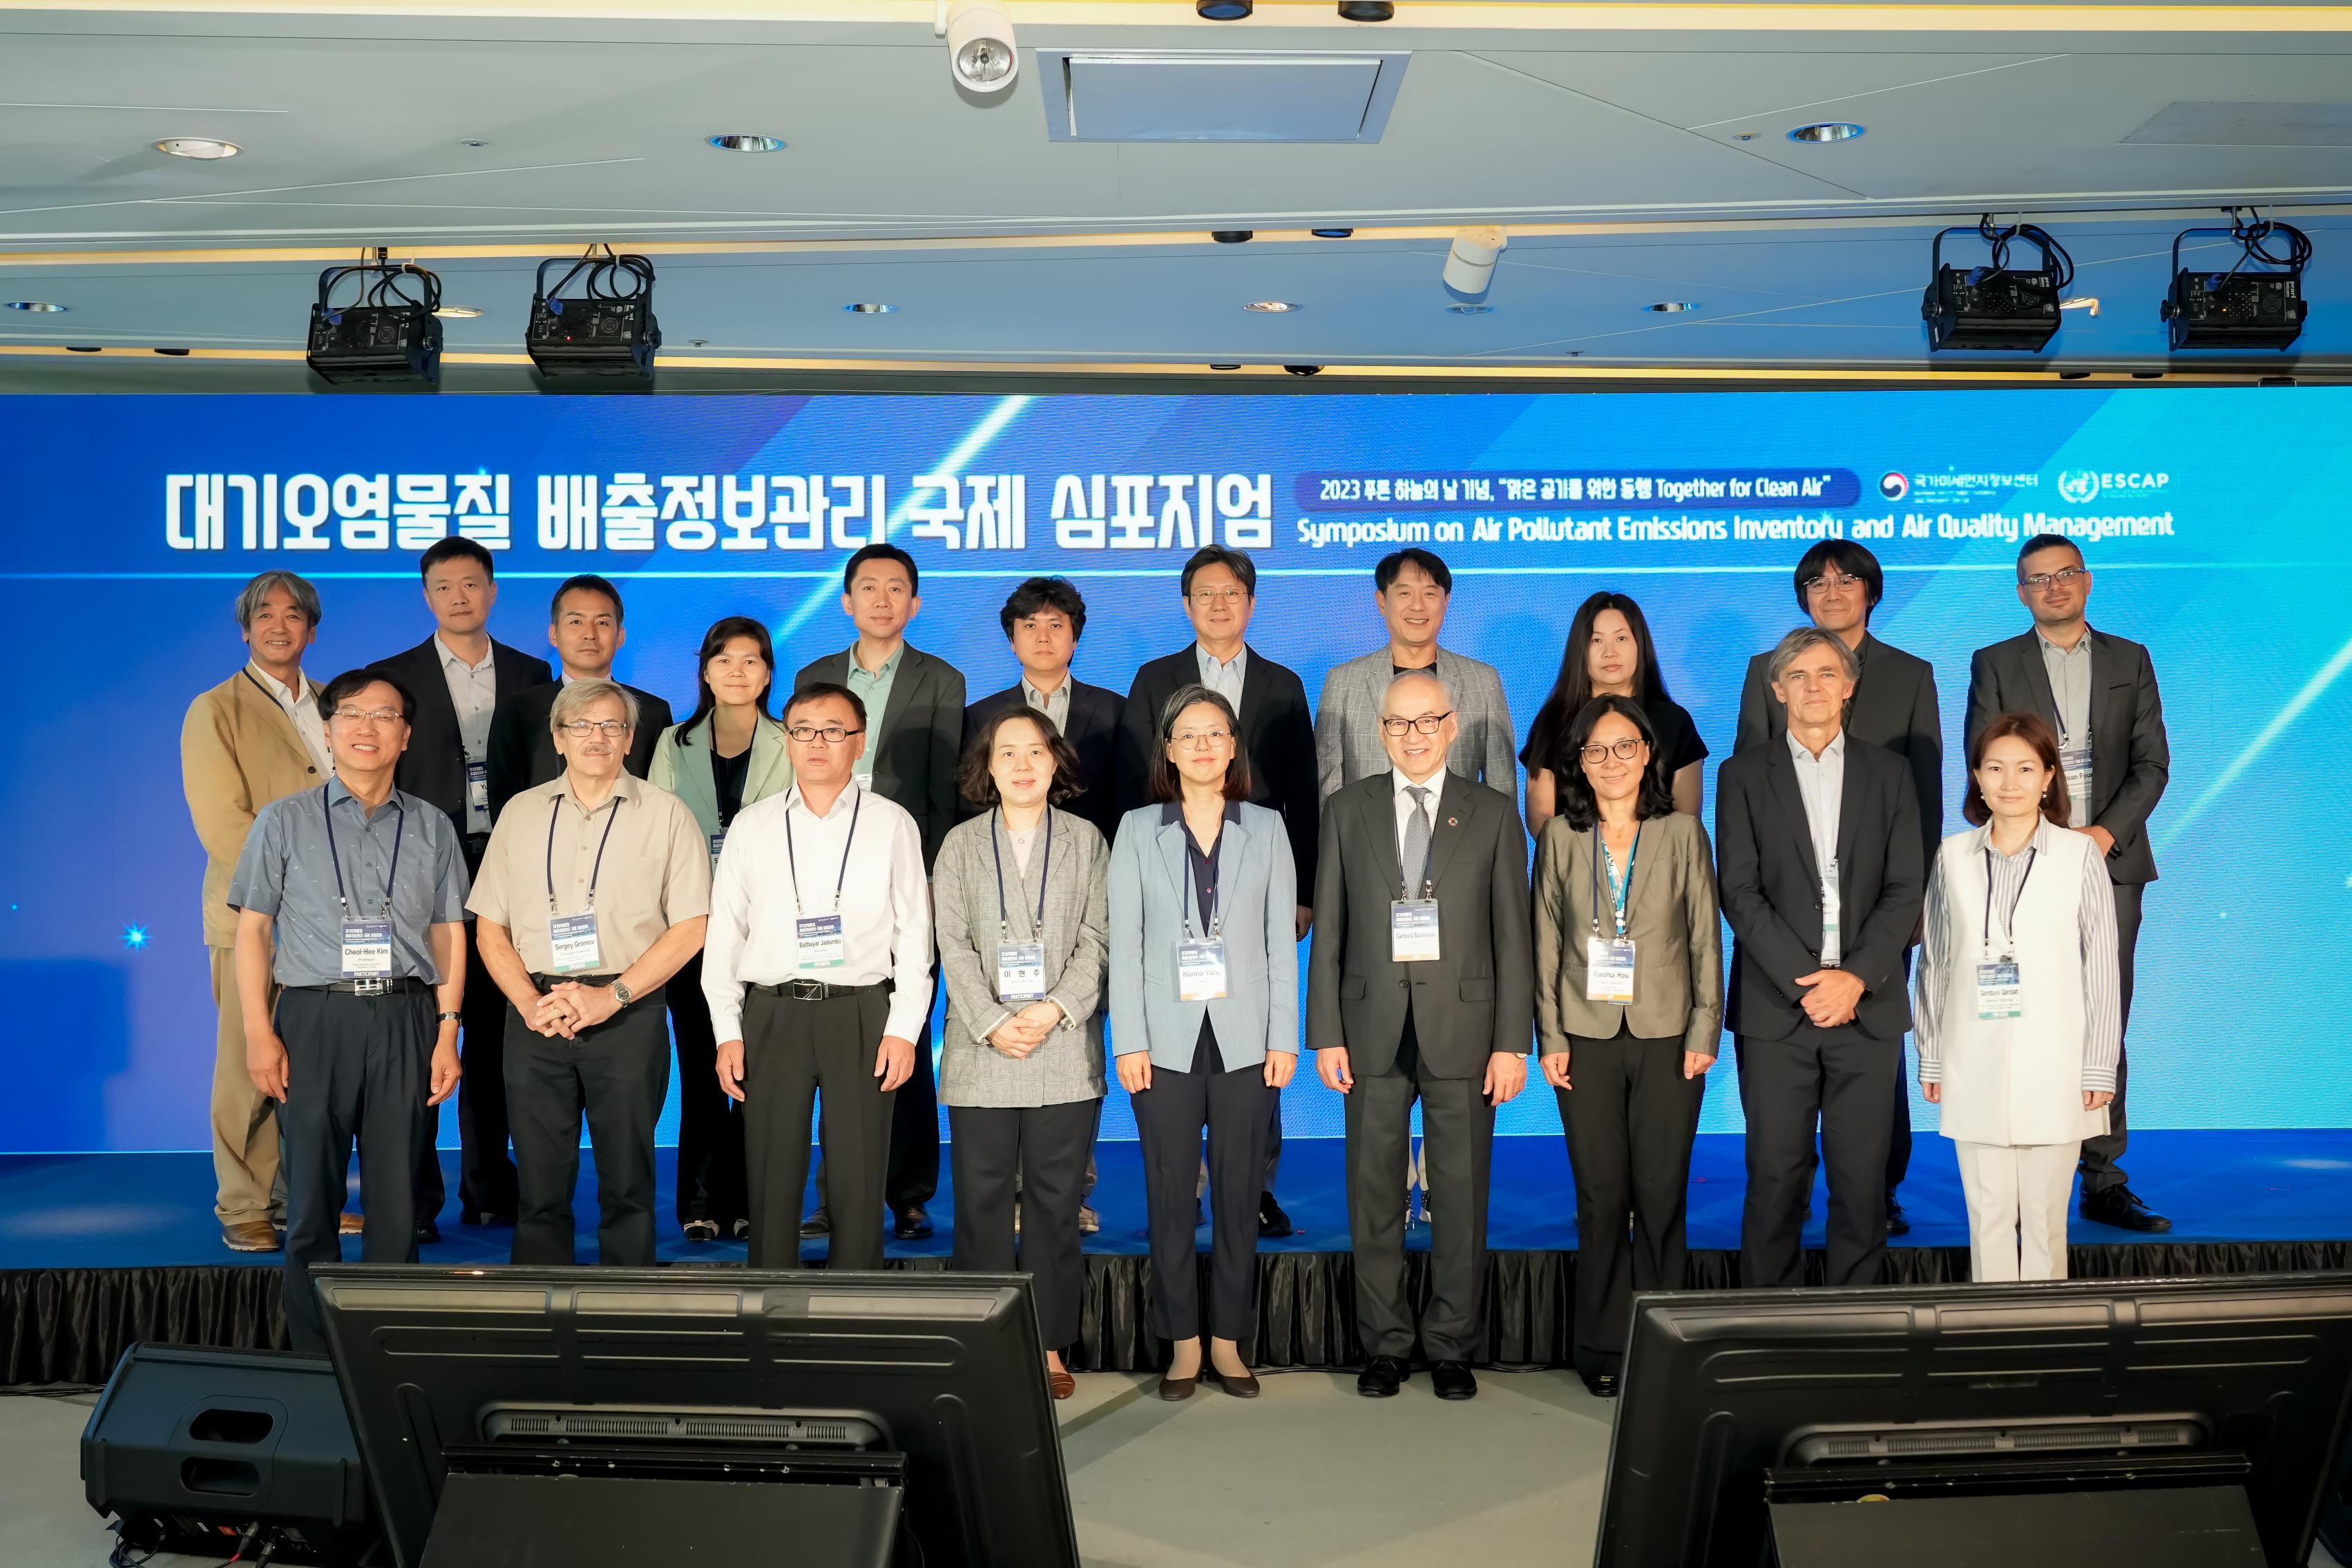 2023 Symposium on Air Pollutant Emissions Inventory and Air Quality Management